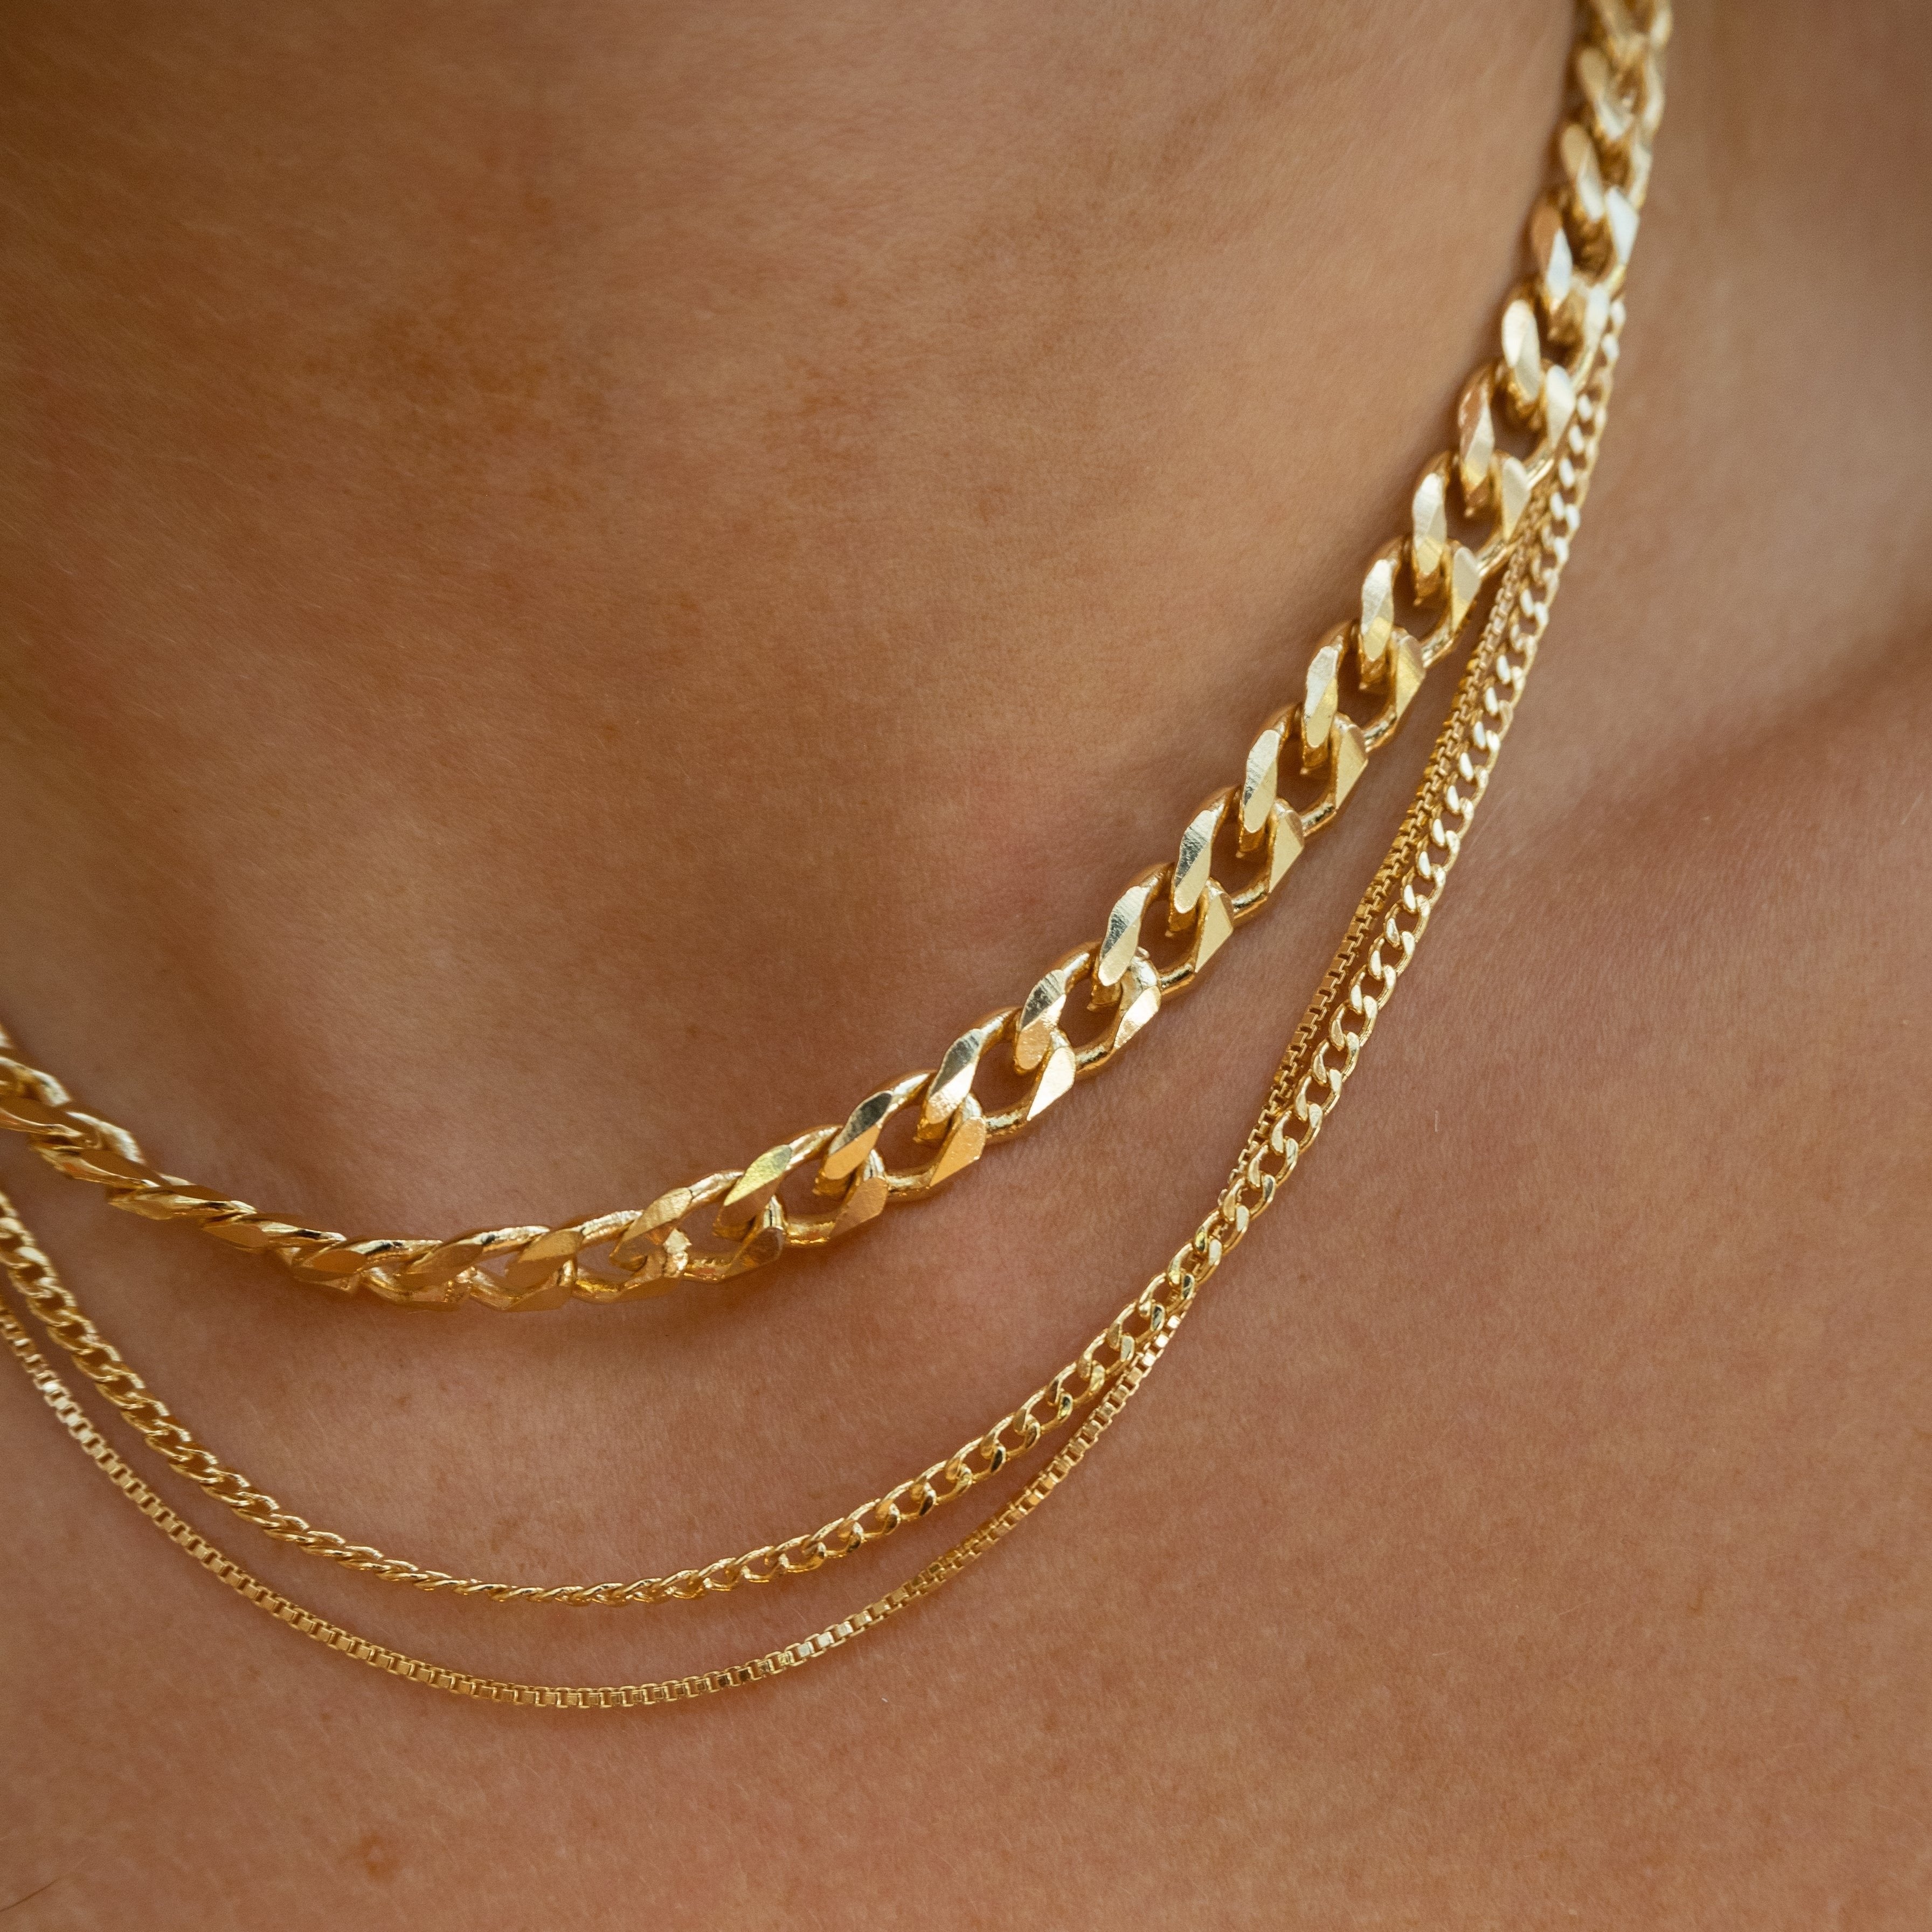 Chunky 14k gold filled cuban layering chain necklace by Vie en Bleu jewelry.cuban chain, thick chain, cuban gold chain, chunky chain, statement chain, chunky necklace, gold cuban necklace, thick gold necklace, gold filled cuban chain, gold filled chunky necklace, gold filled necklace, gold fill chain, 14k, 18k, water resistant, hypoallergenic,